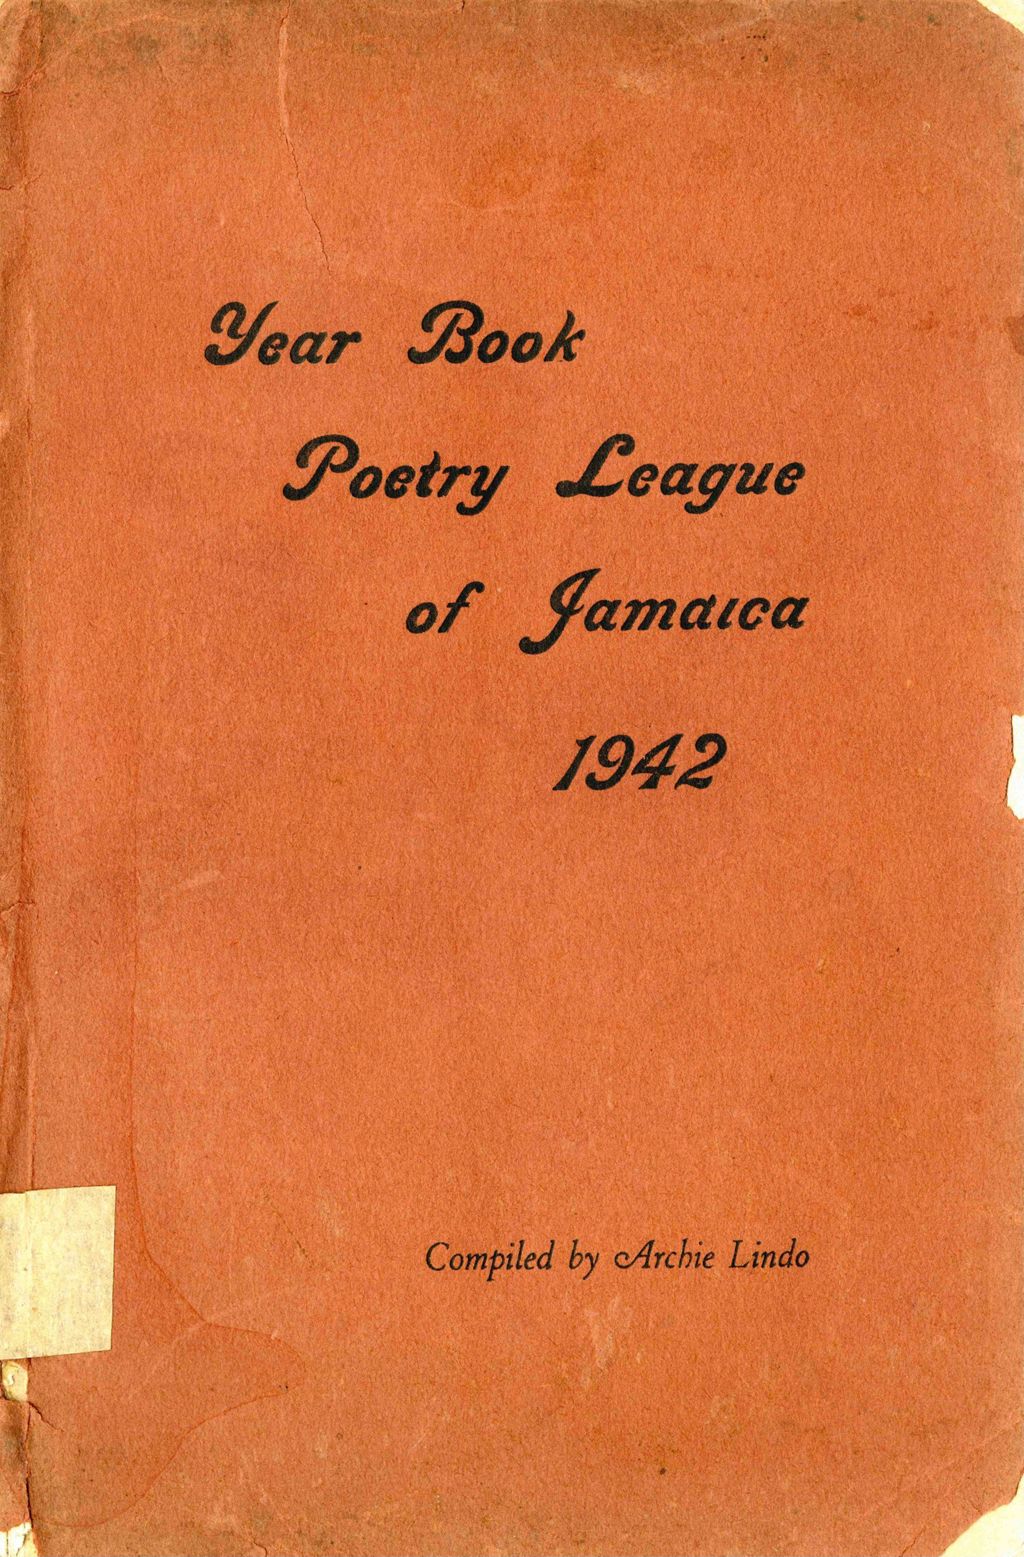 Miniature of Year Book, Poetry League of Jamaica